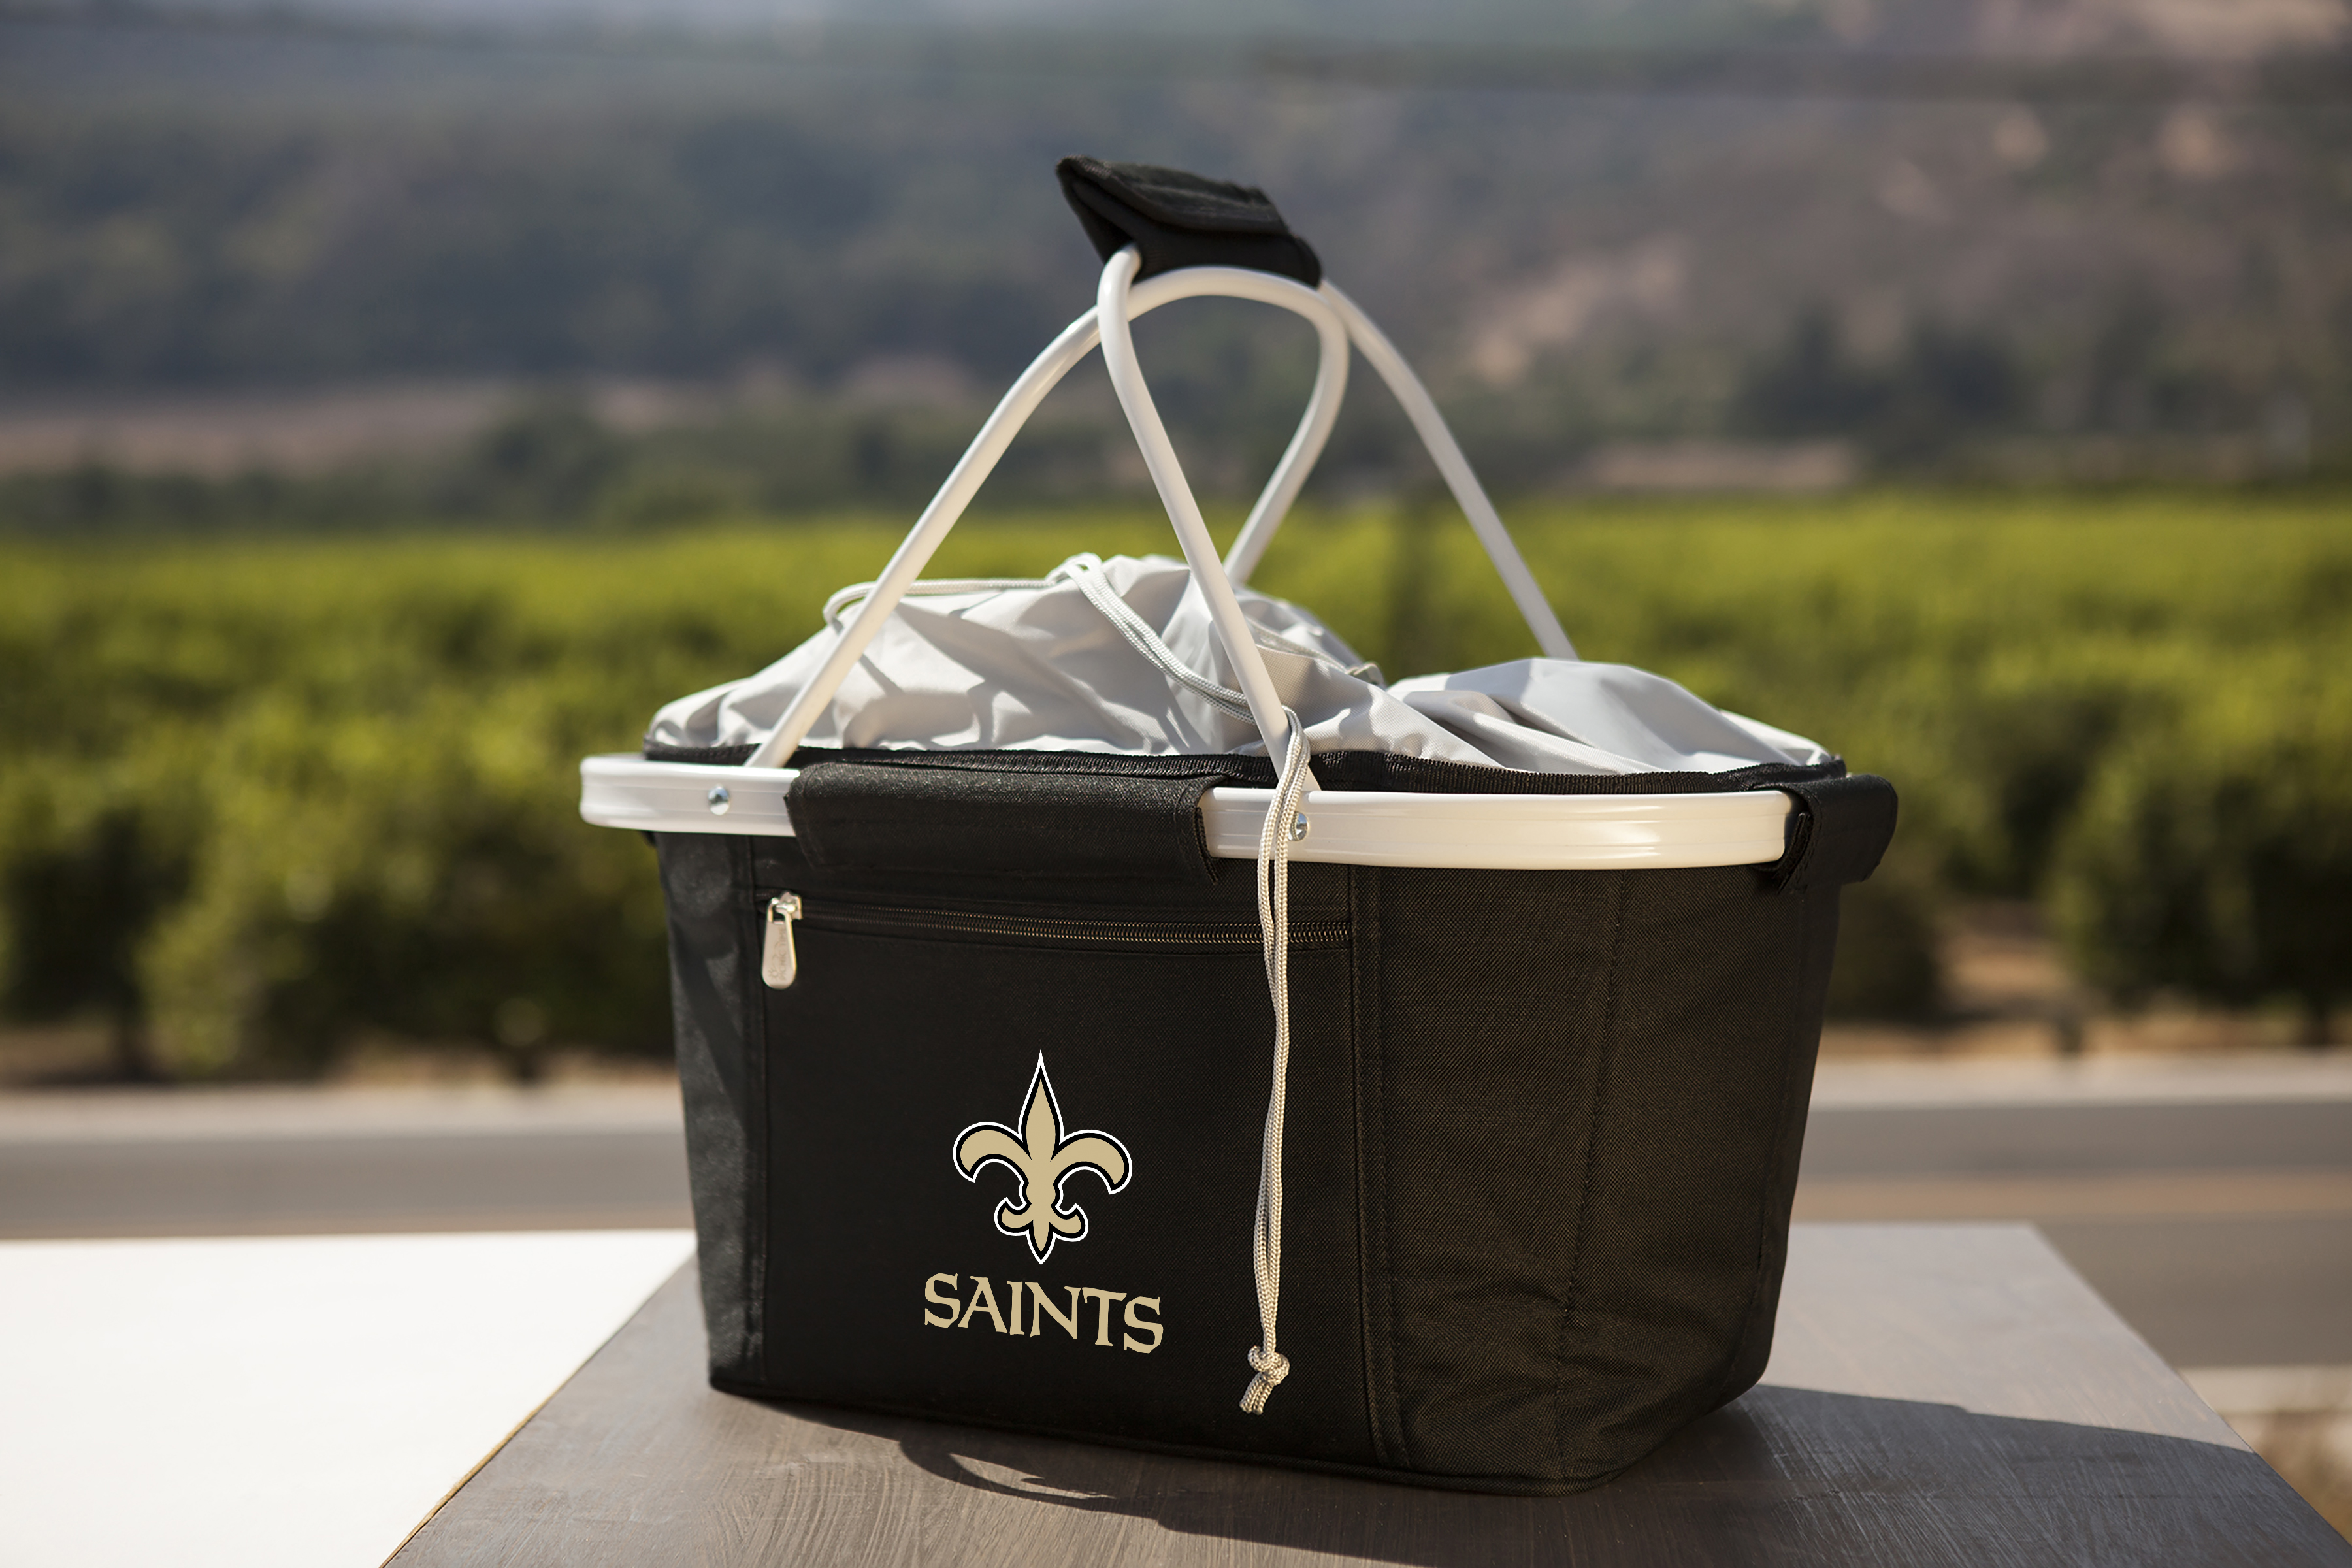 New Orleans Saints - Metro Basket Collapsible Cooler Tote